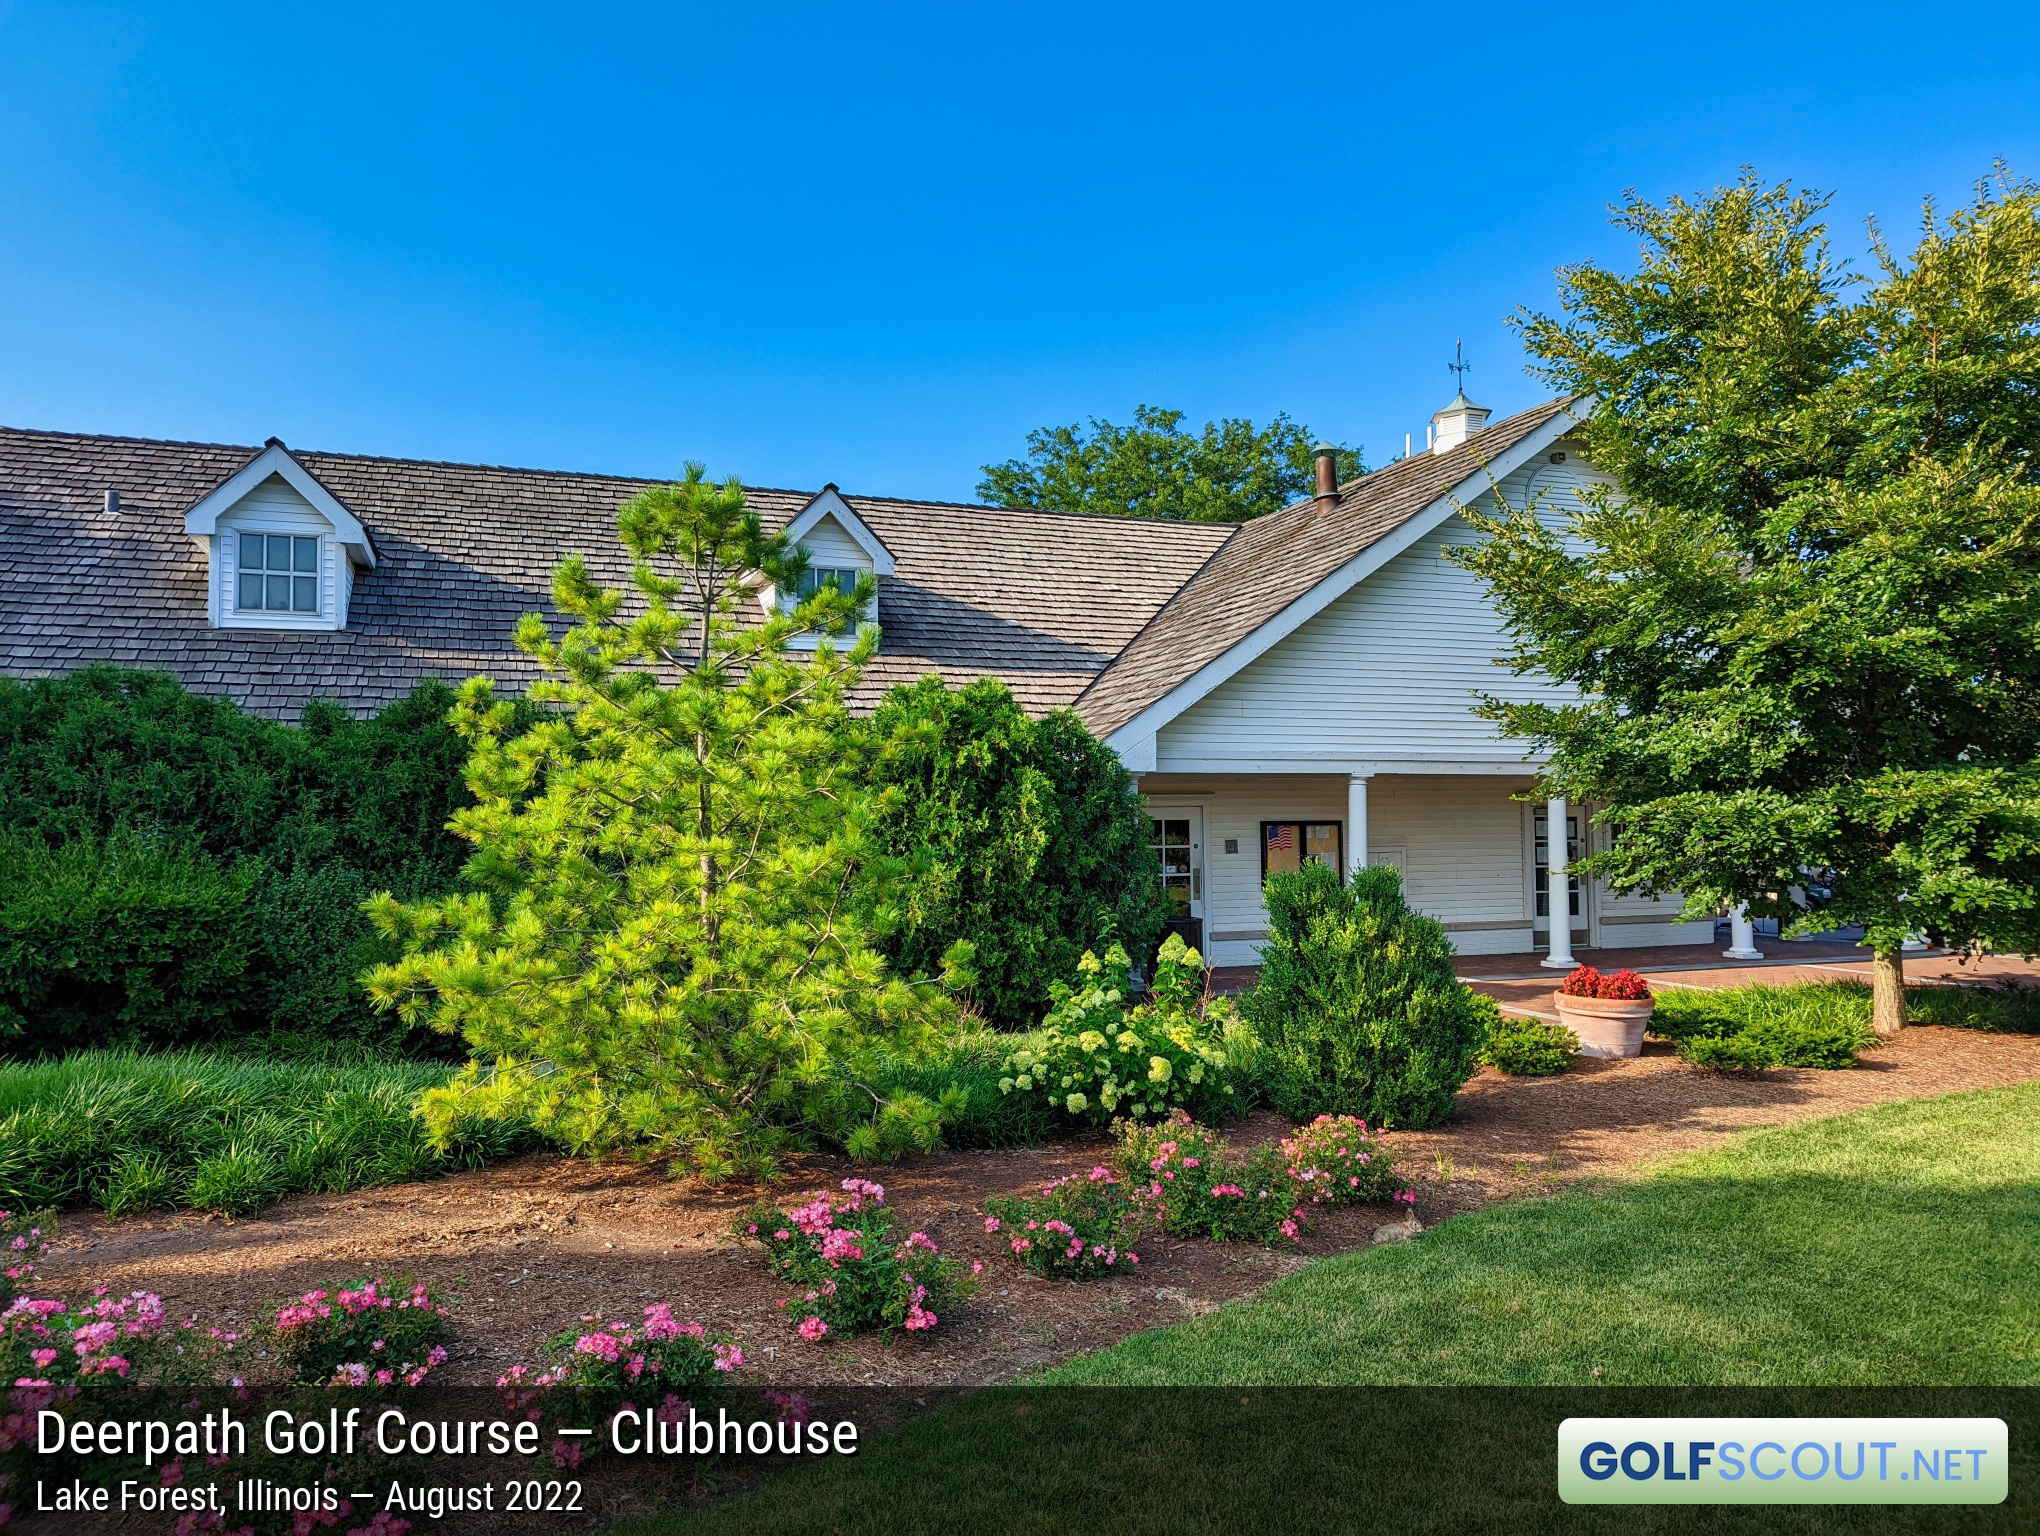 Photo of the clubhouse at Deerpath Golf Course in Lake Forest, Illinois. 